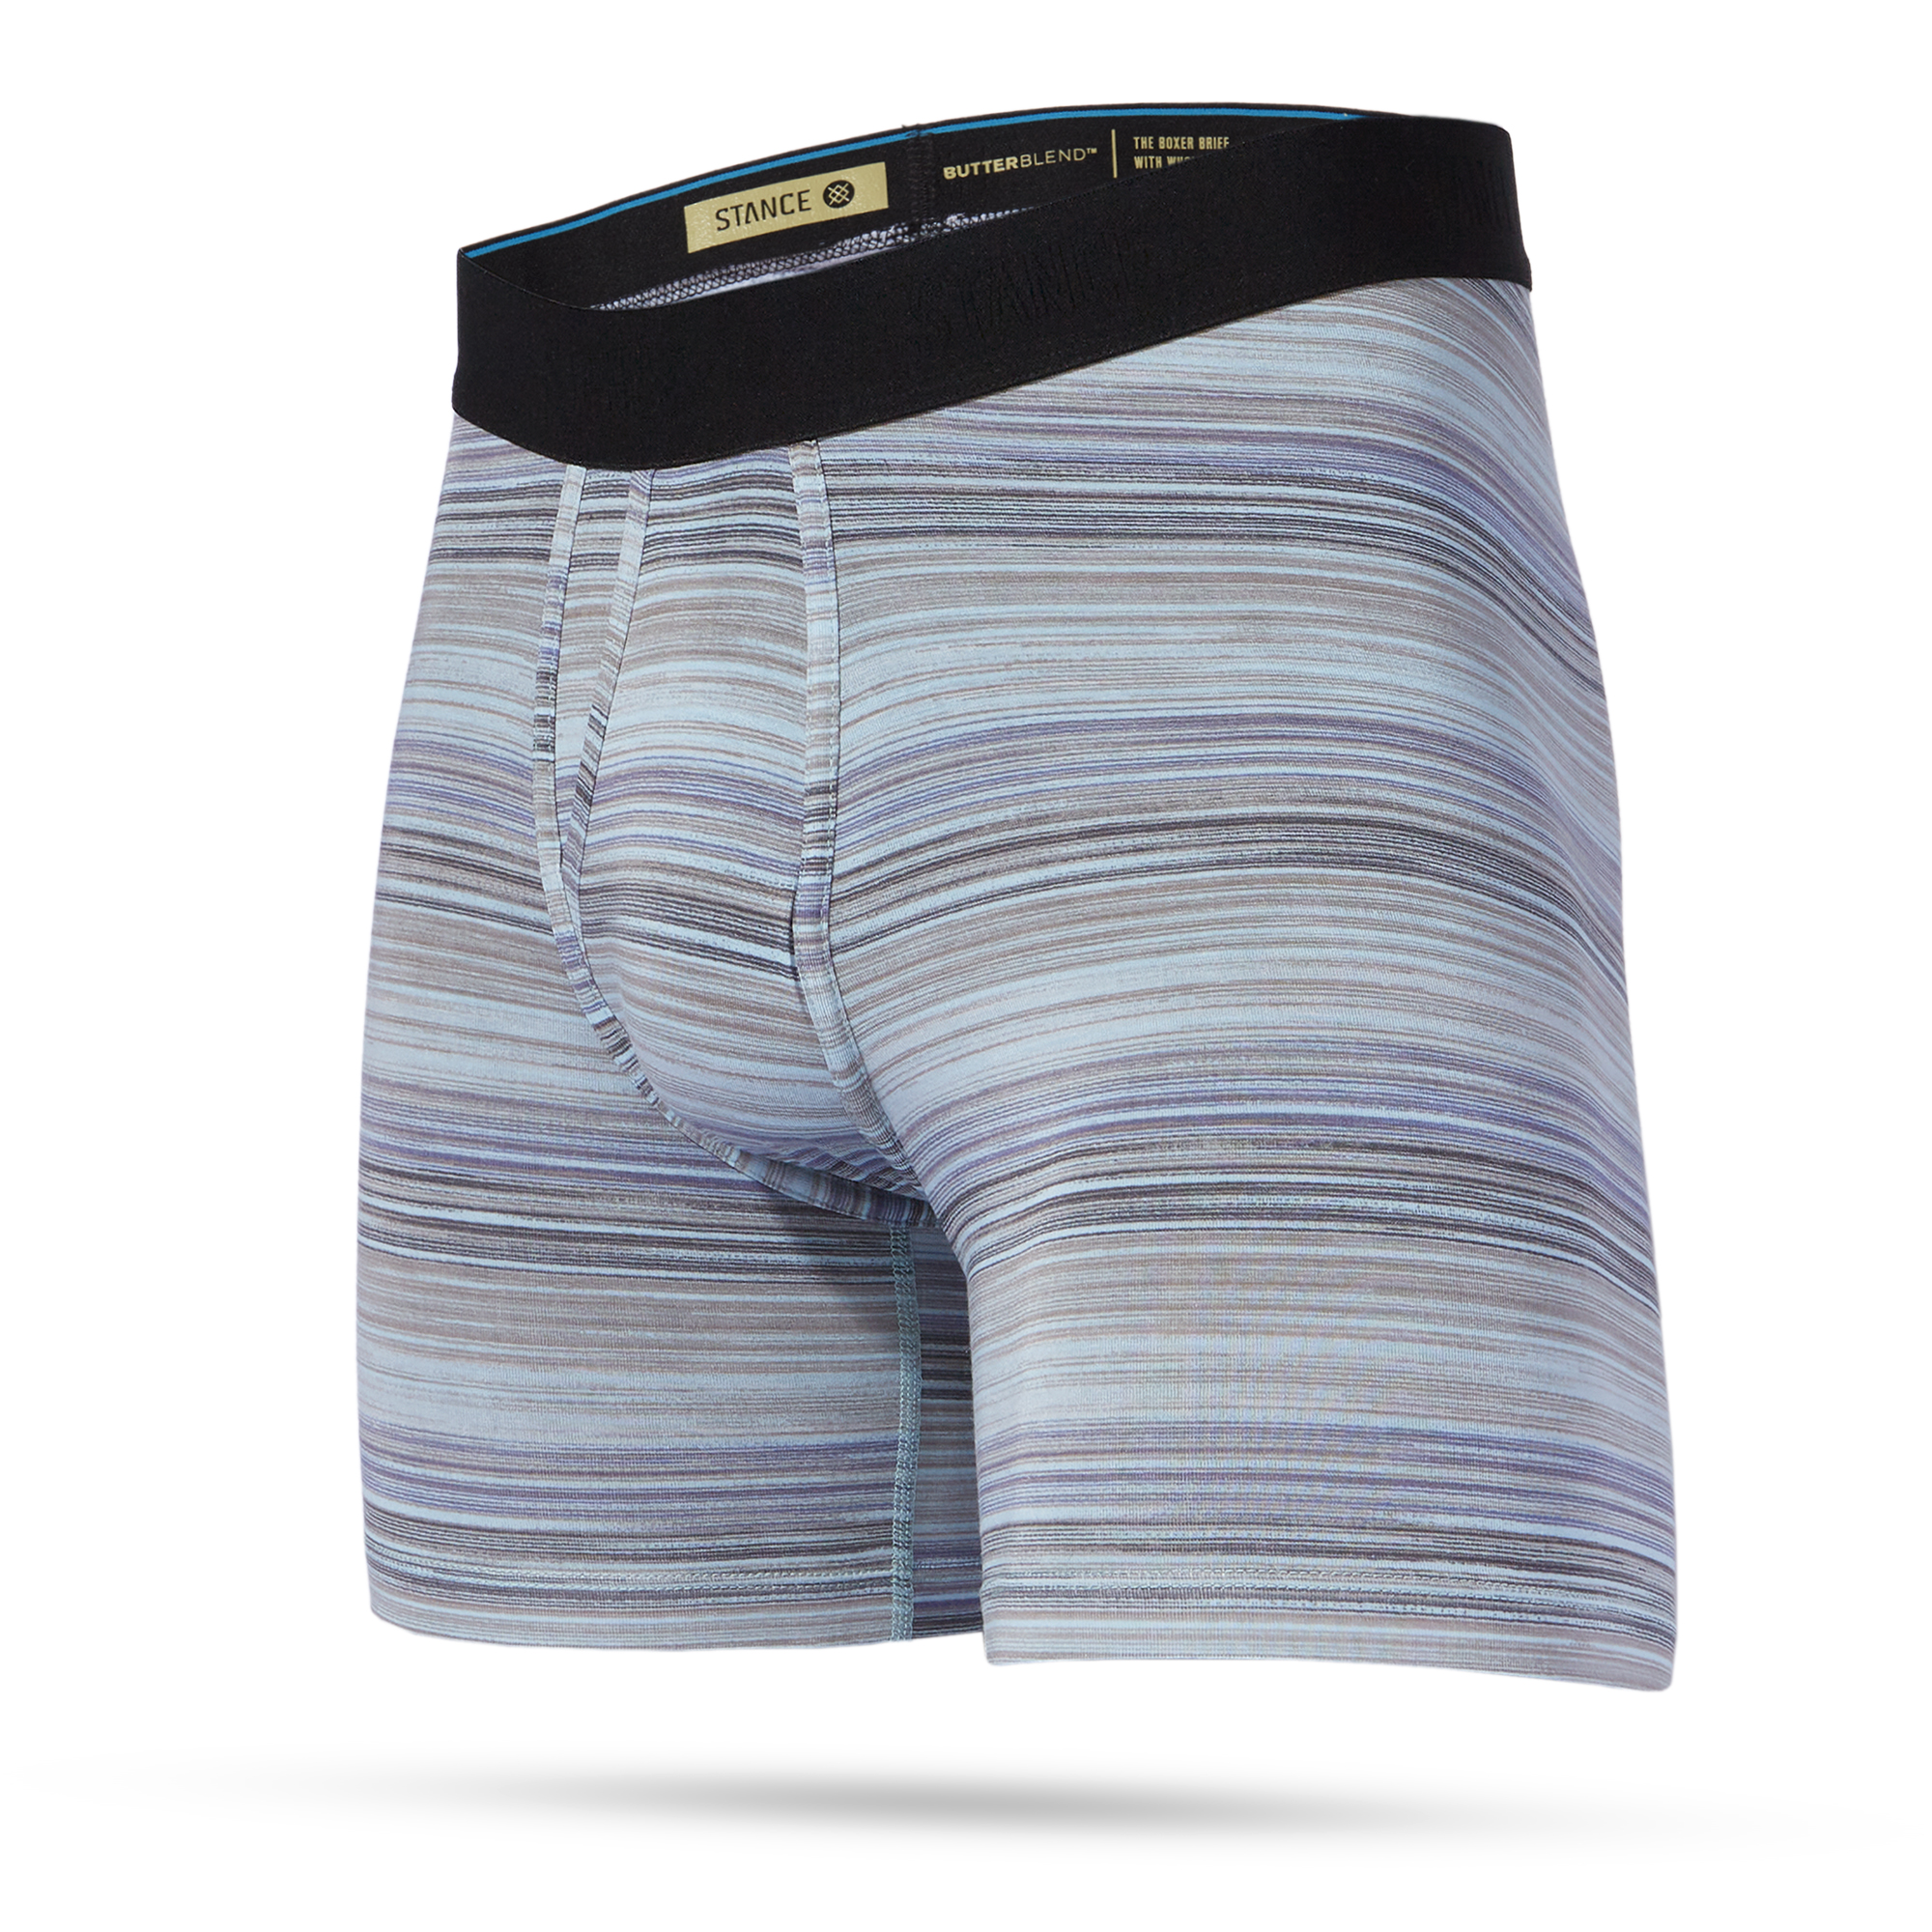 Stance Reflection Boxer Brief - Navy